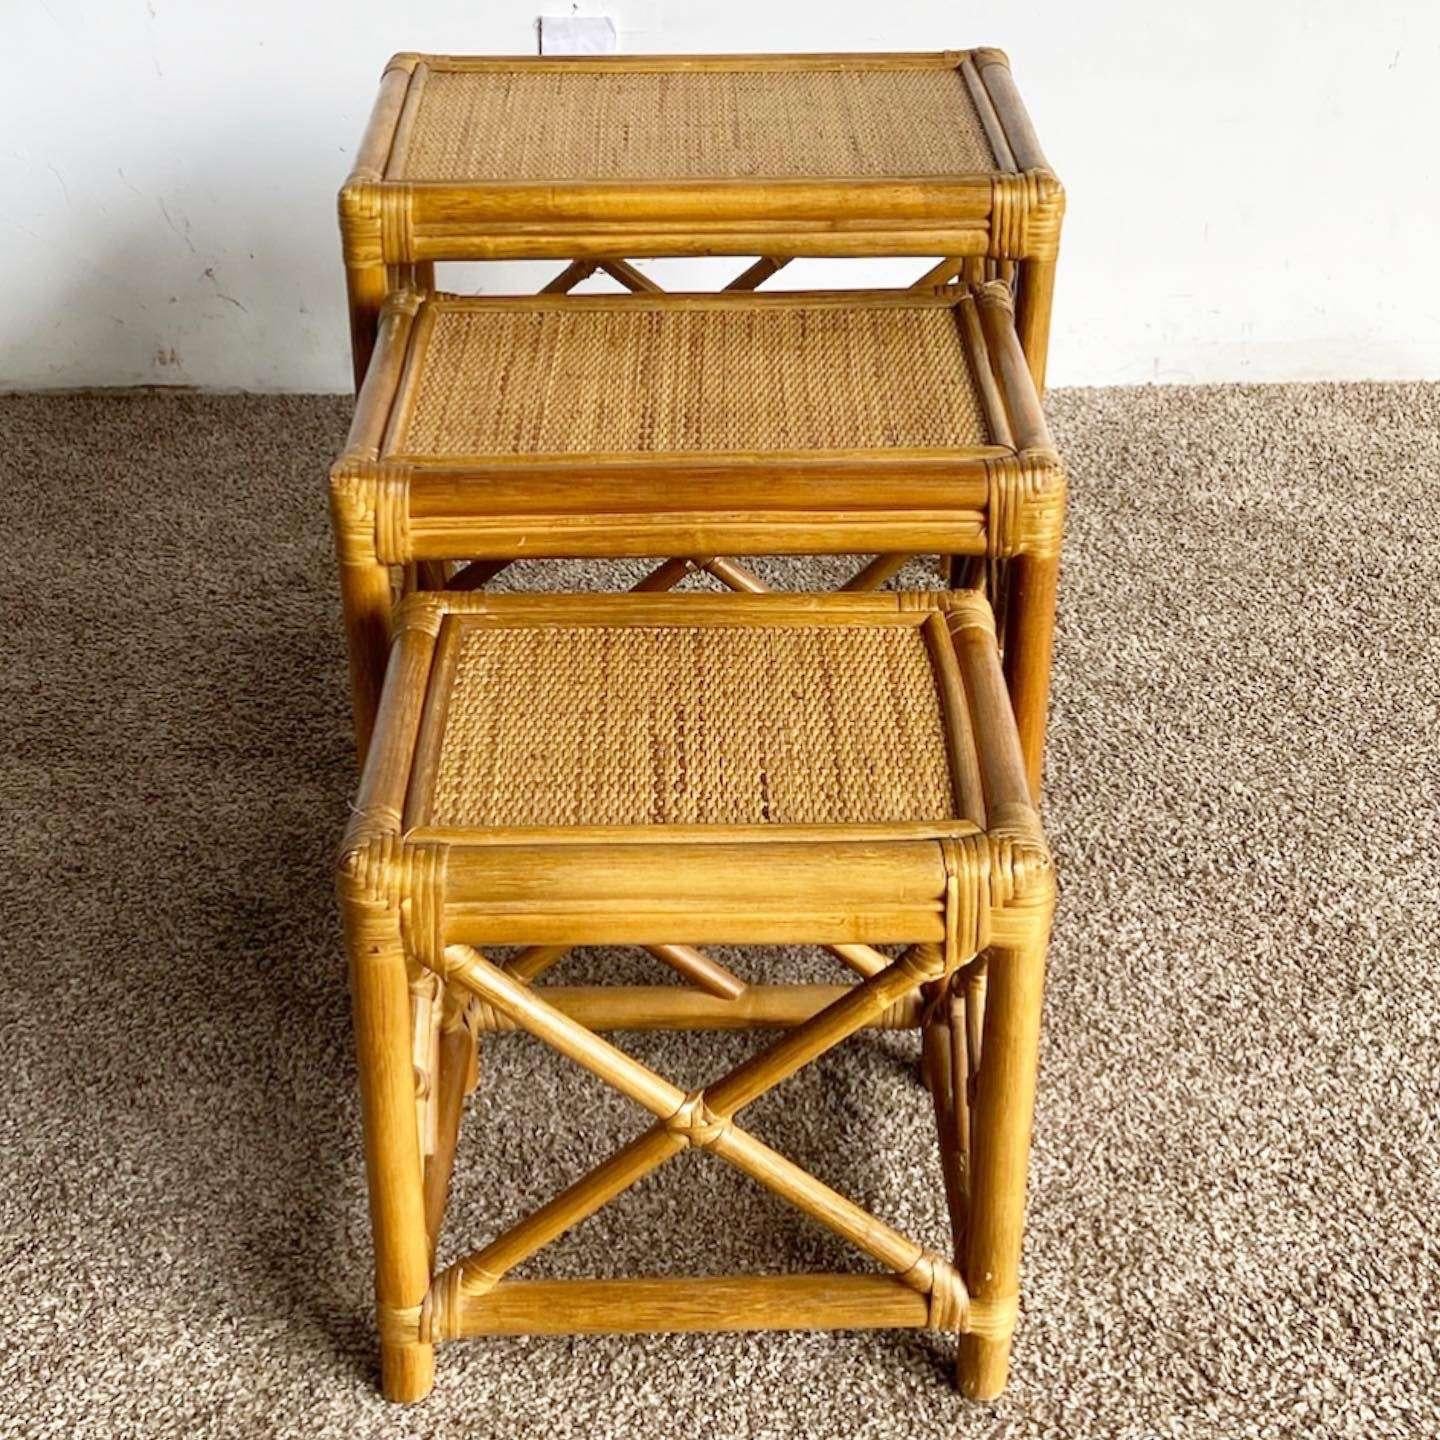 Philippine Boho Chic Chippendale Bamboo Rattan and Wicker Nesting Tables - Set of 3 For Sale